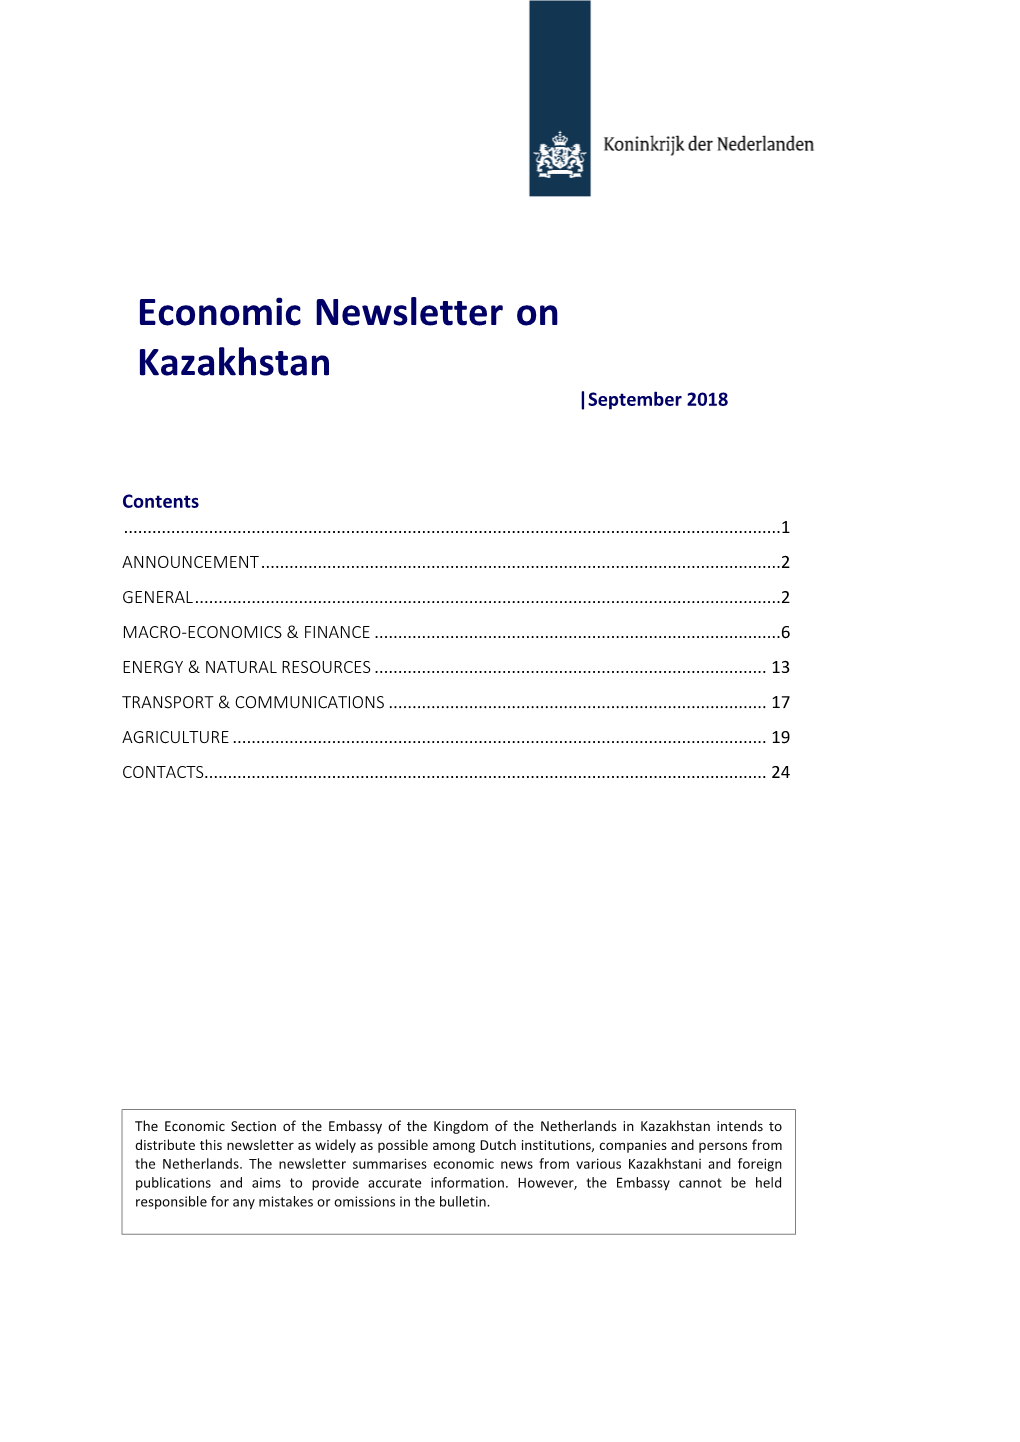 Economic Newsletter on Kazakhstan Appears Every Month and Is Distributed by E-Mail